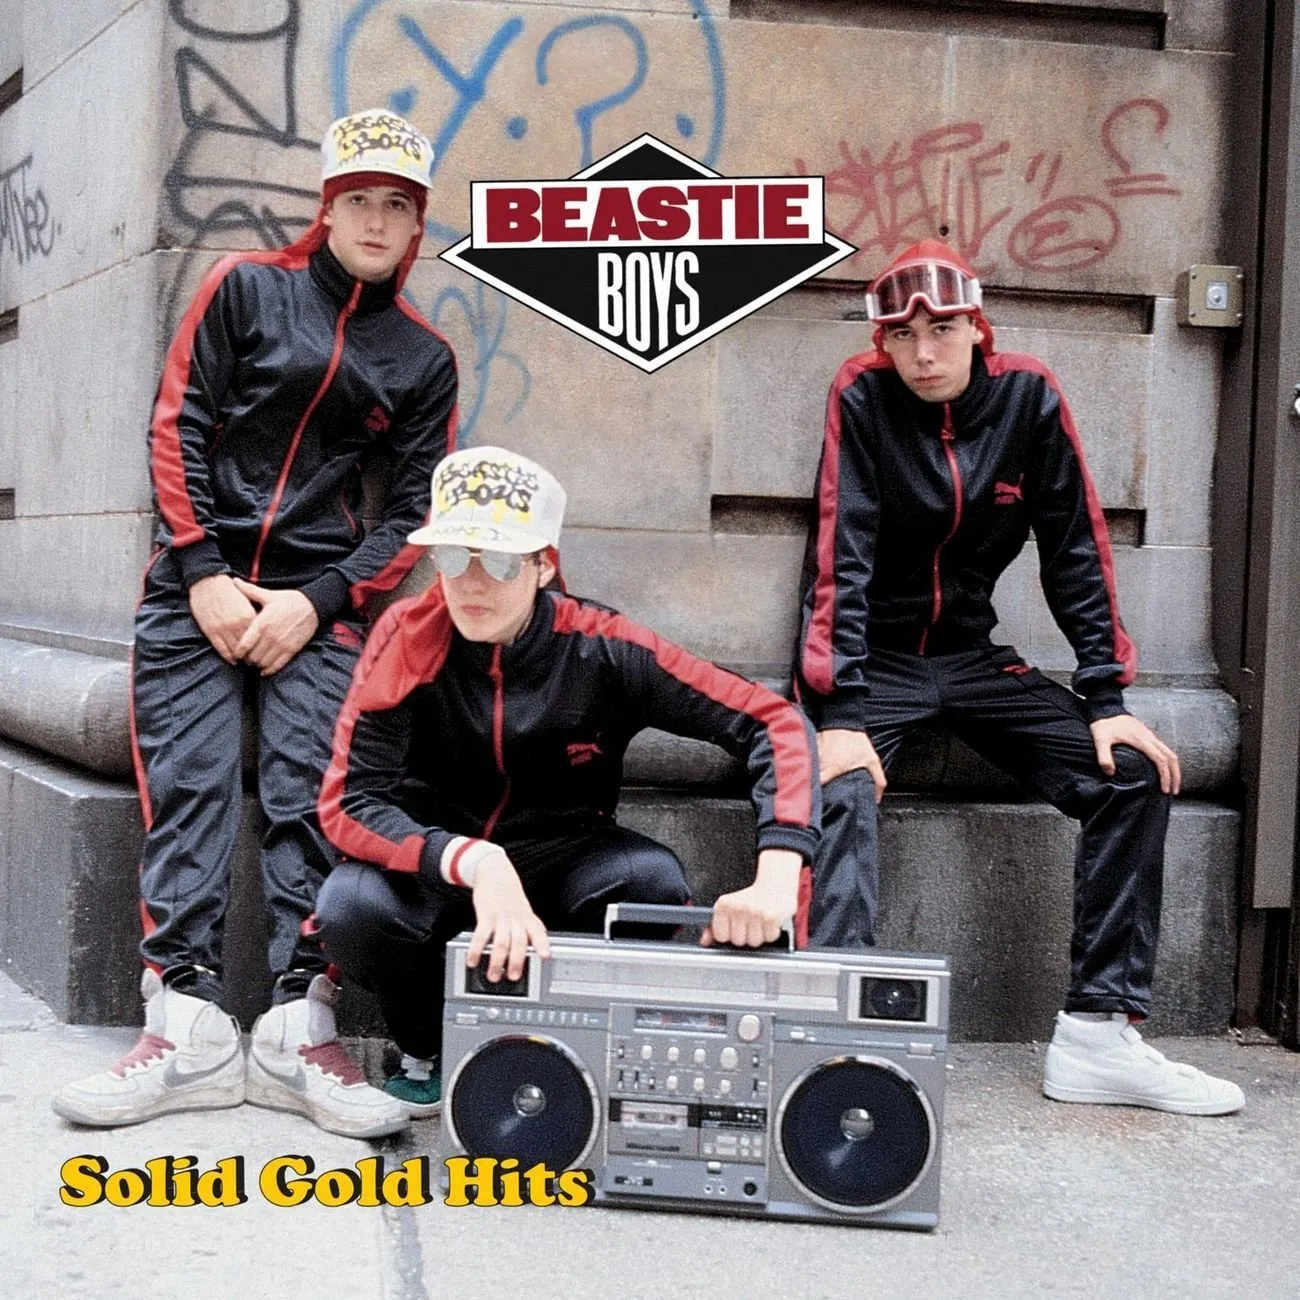 <strong>Beastie Boys - Solid Gold Hits</strong> (Vinyl LP - black)